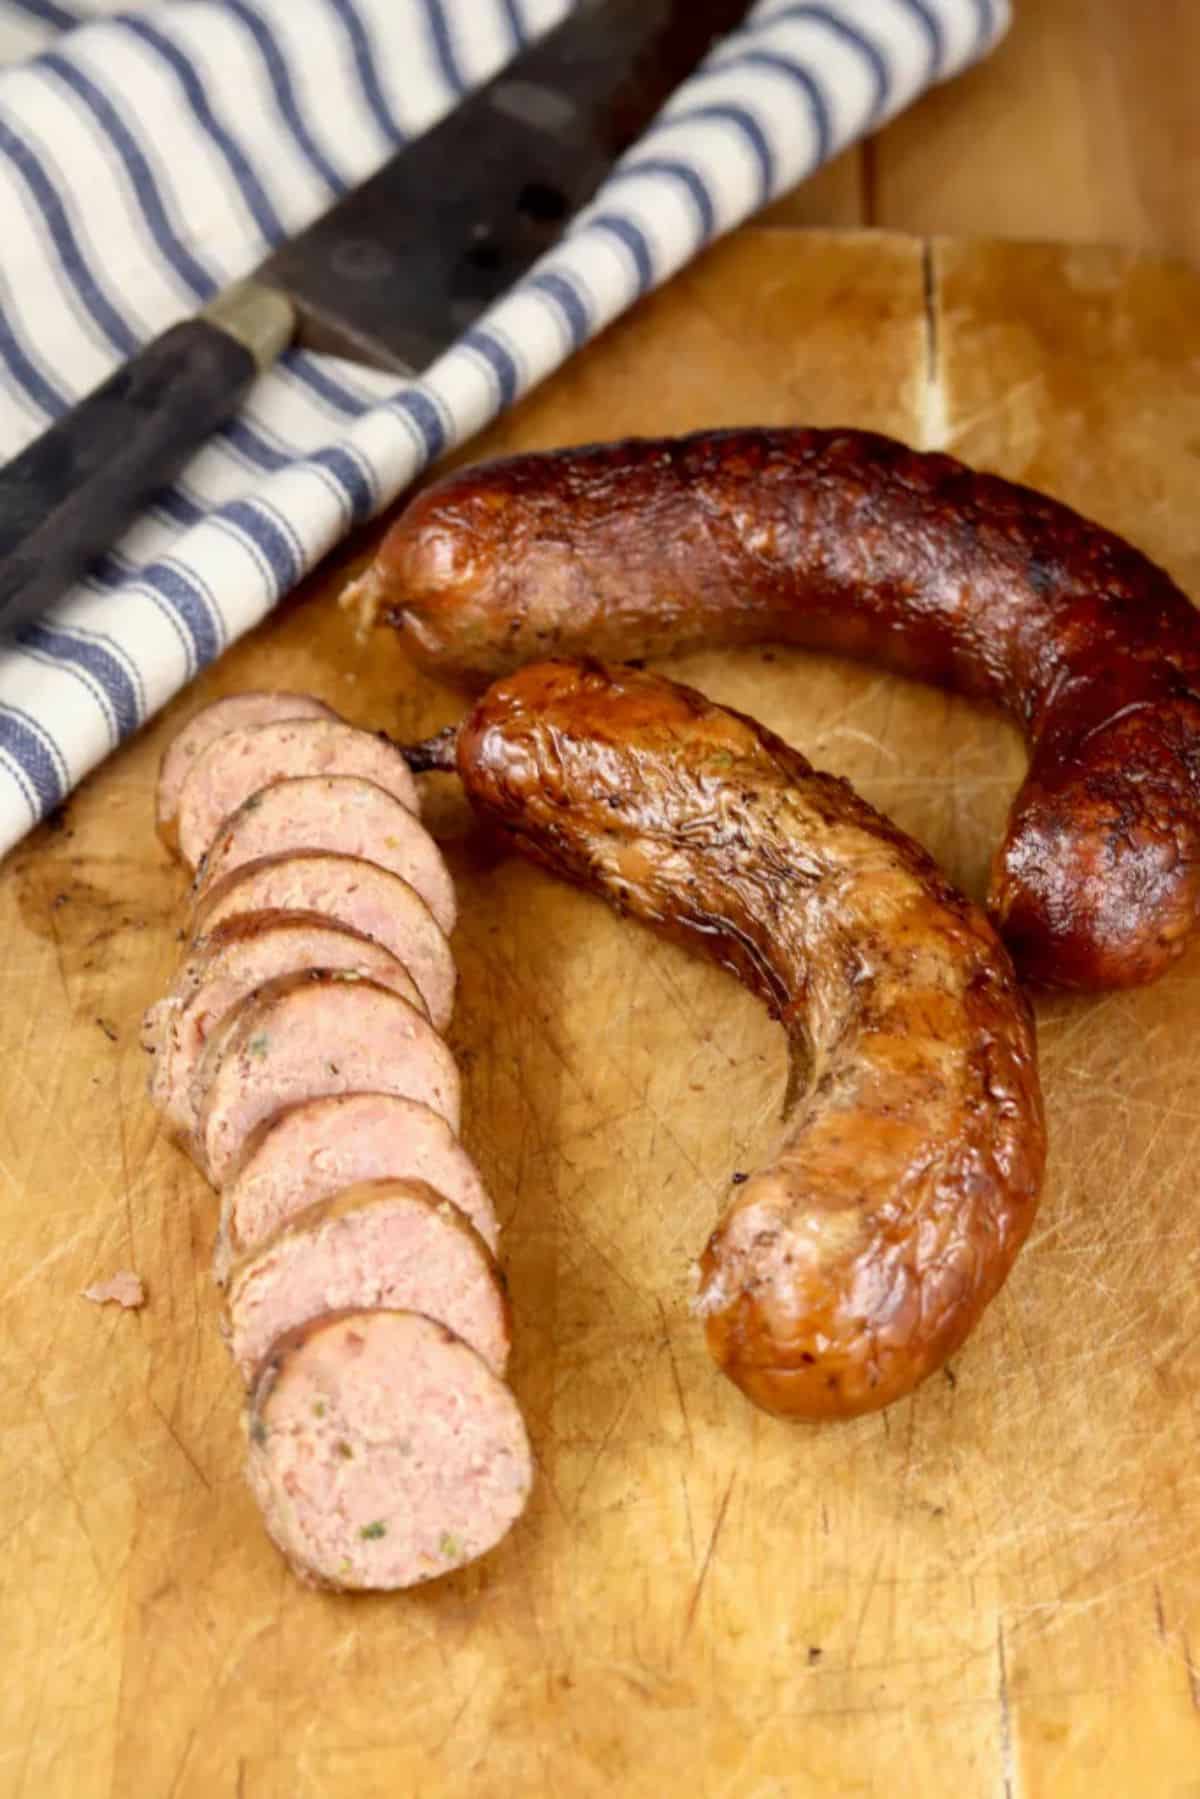 Scrumptious andouille sausage on a wooden cutting board.